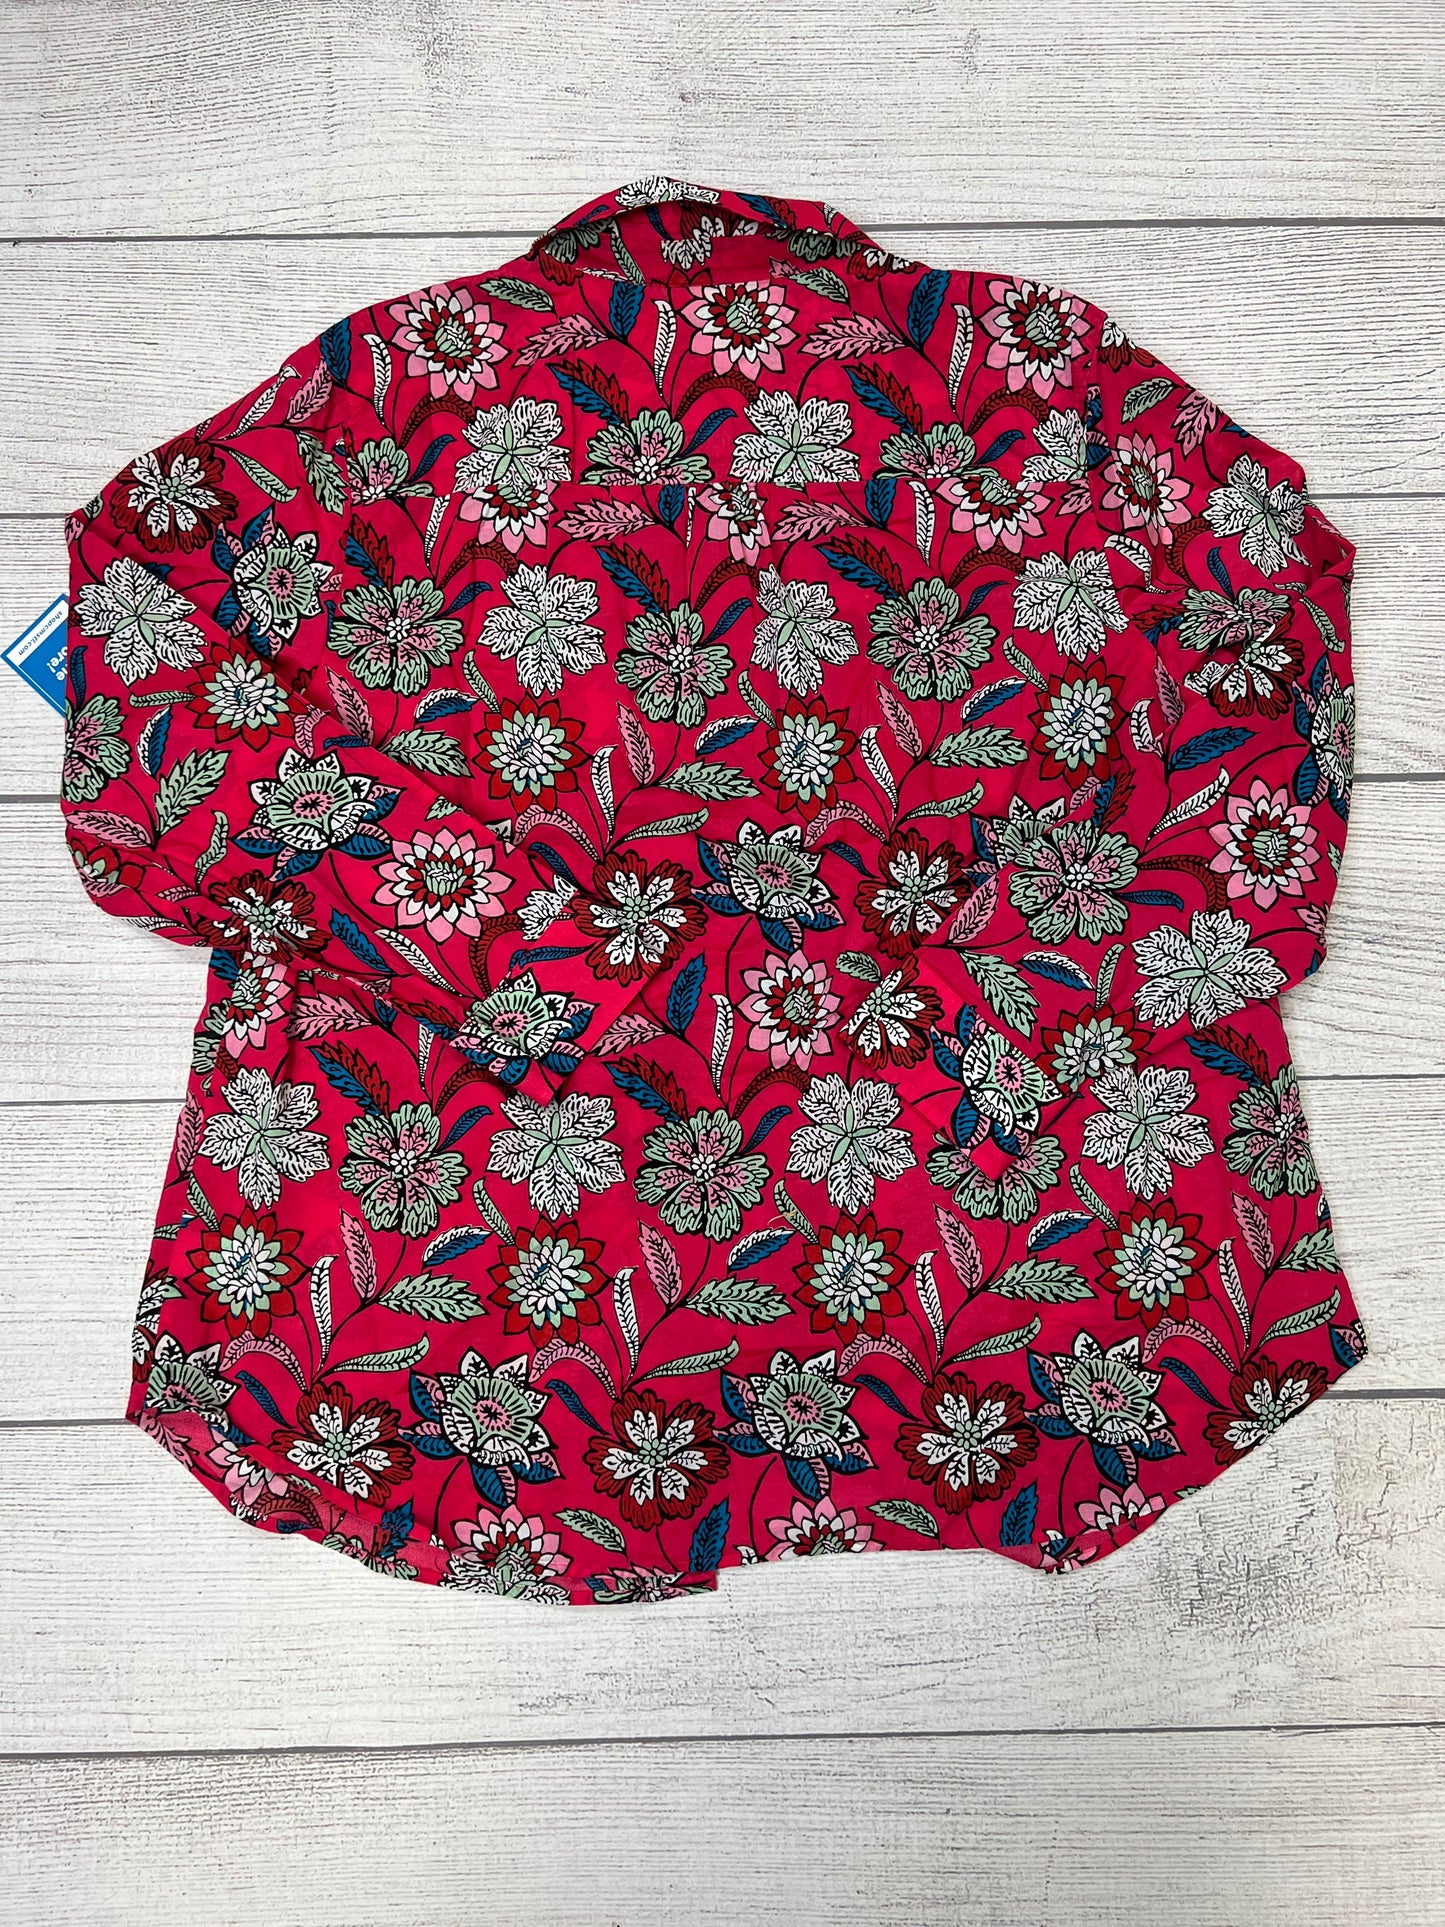 Floral Blouse Long Sleeve Talbots, Size 2x